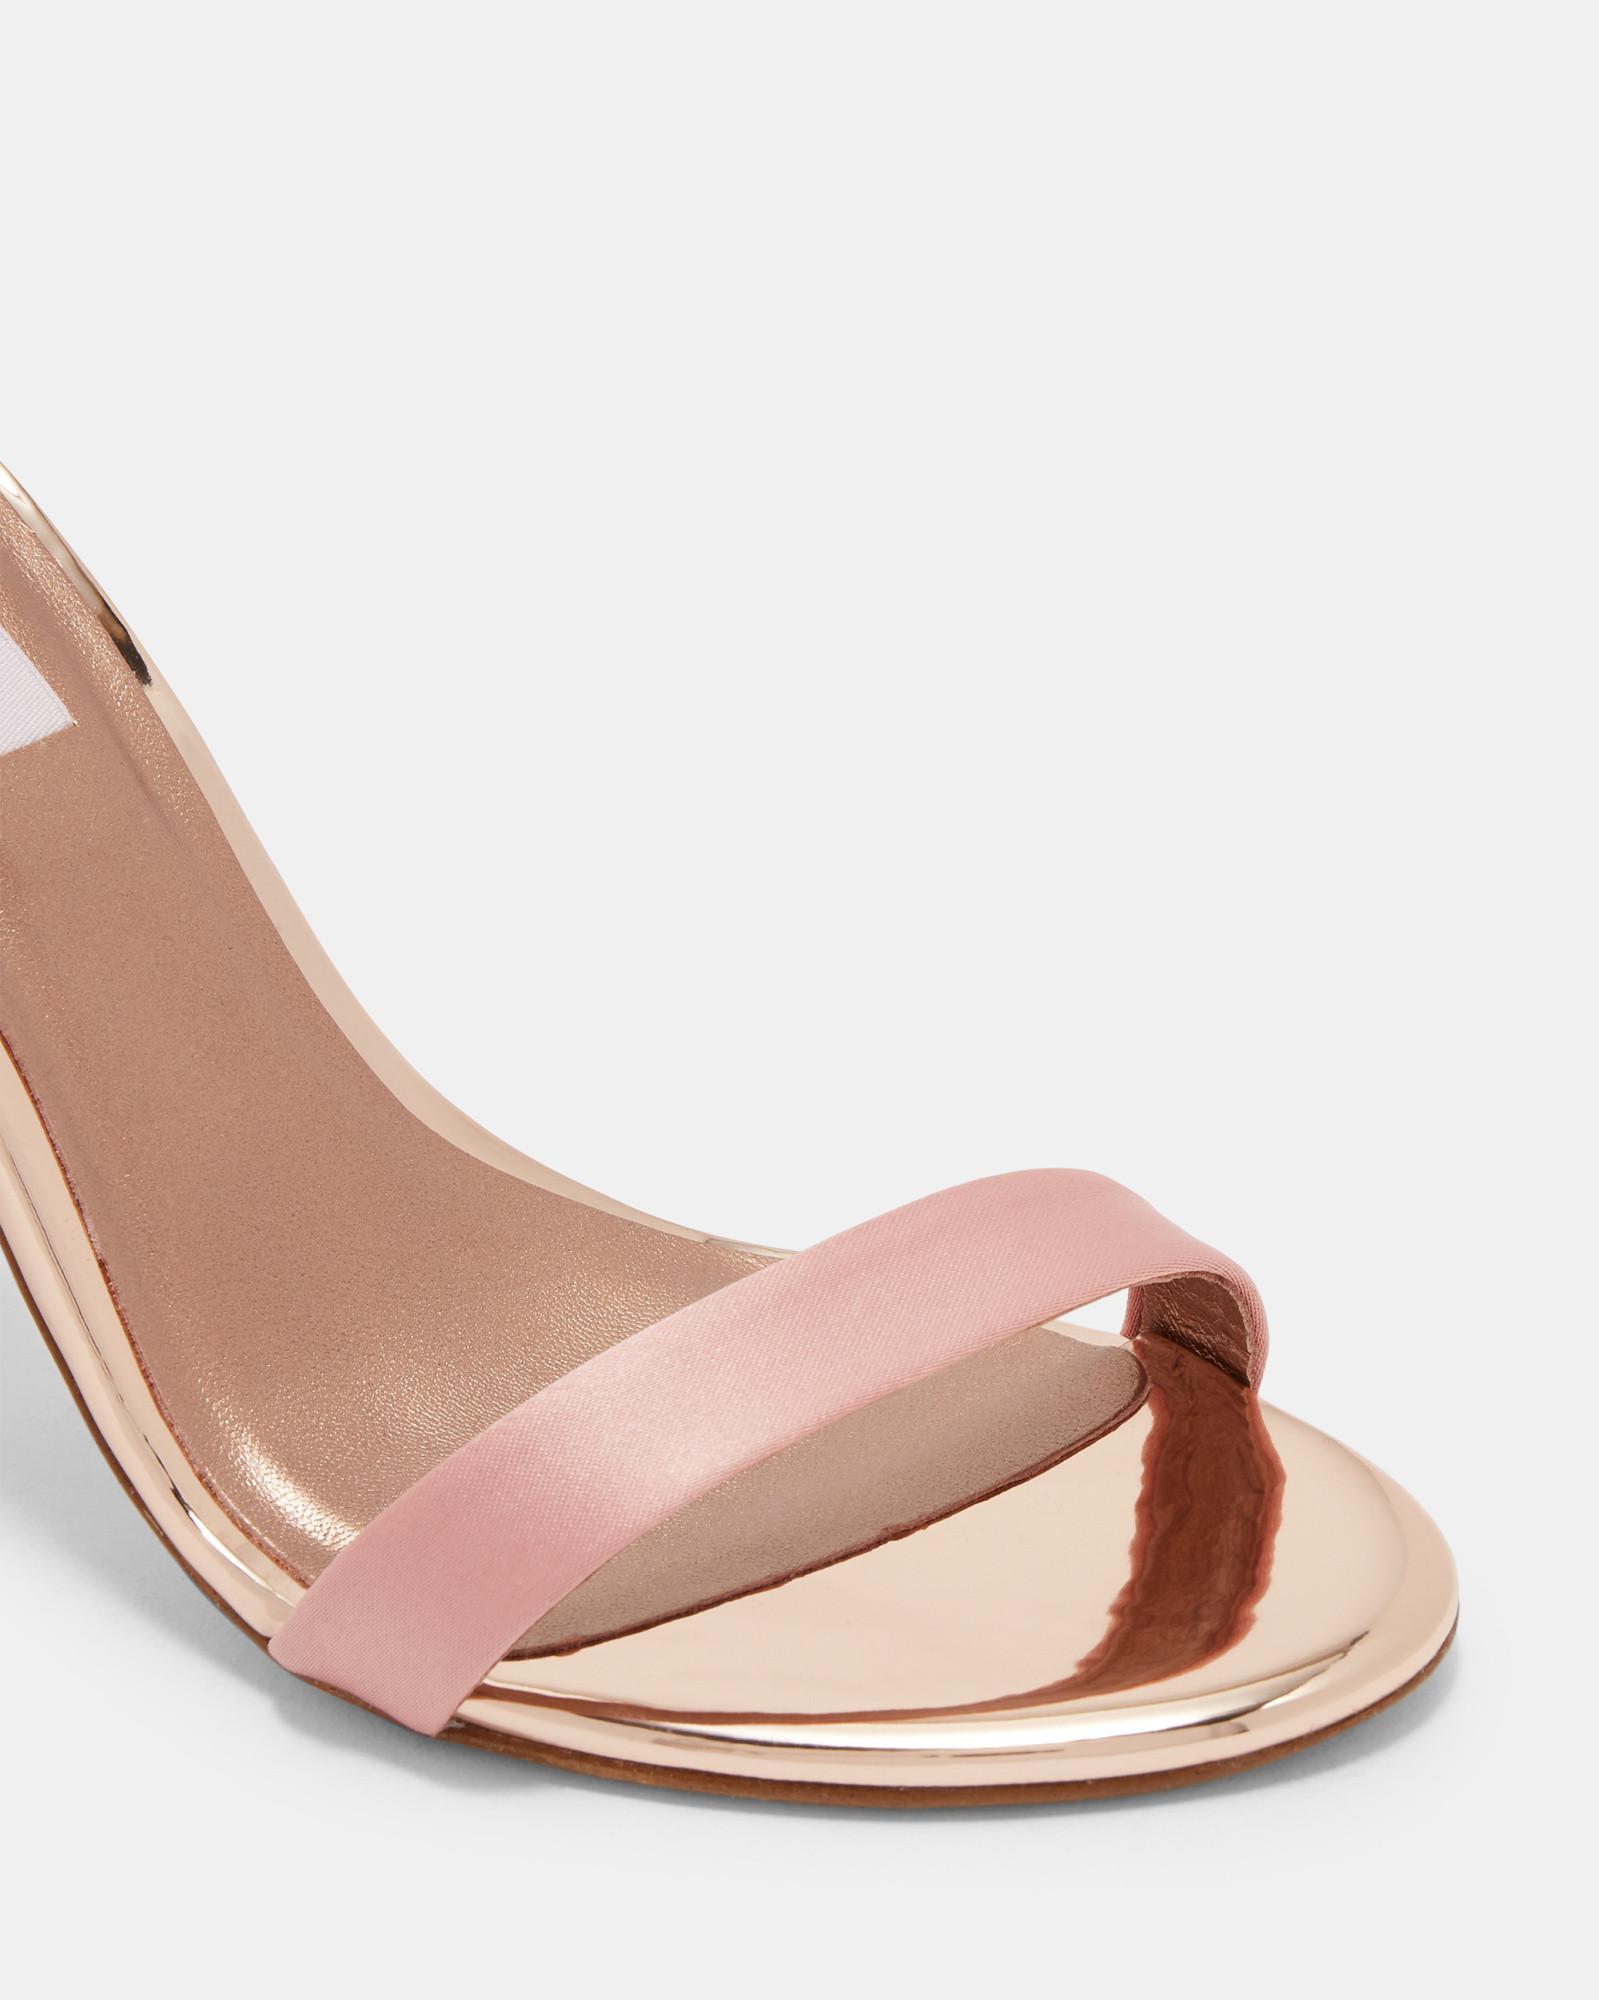 Ted Baker Bow Detail Heeled Sandals in Pink | Lyst